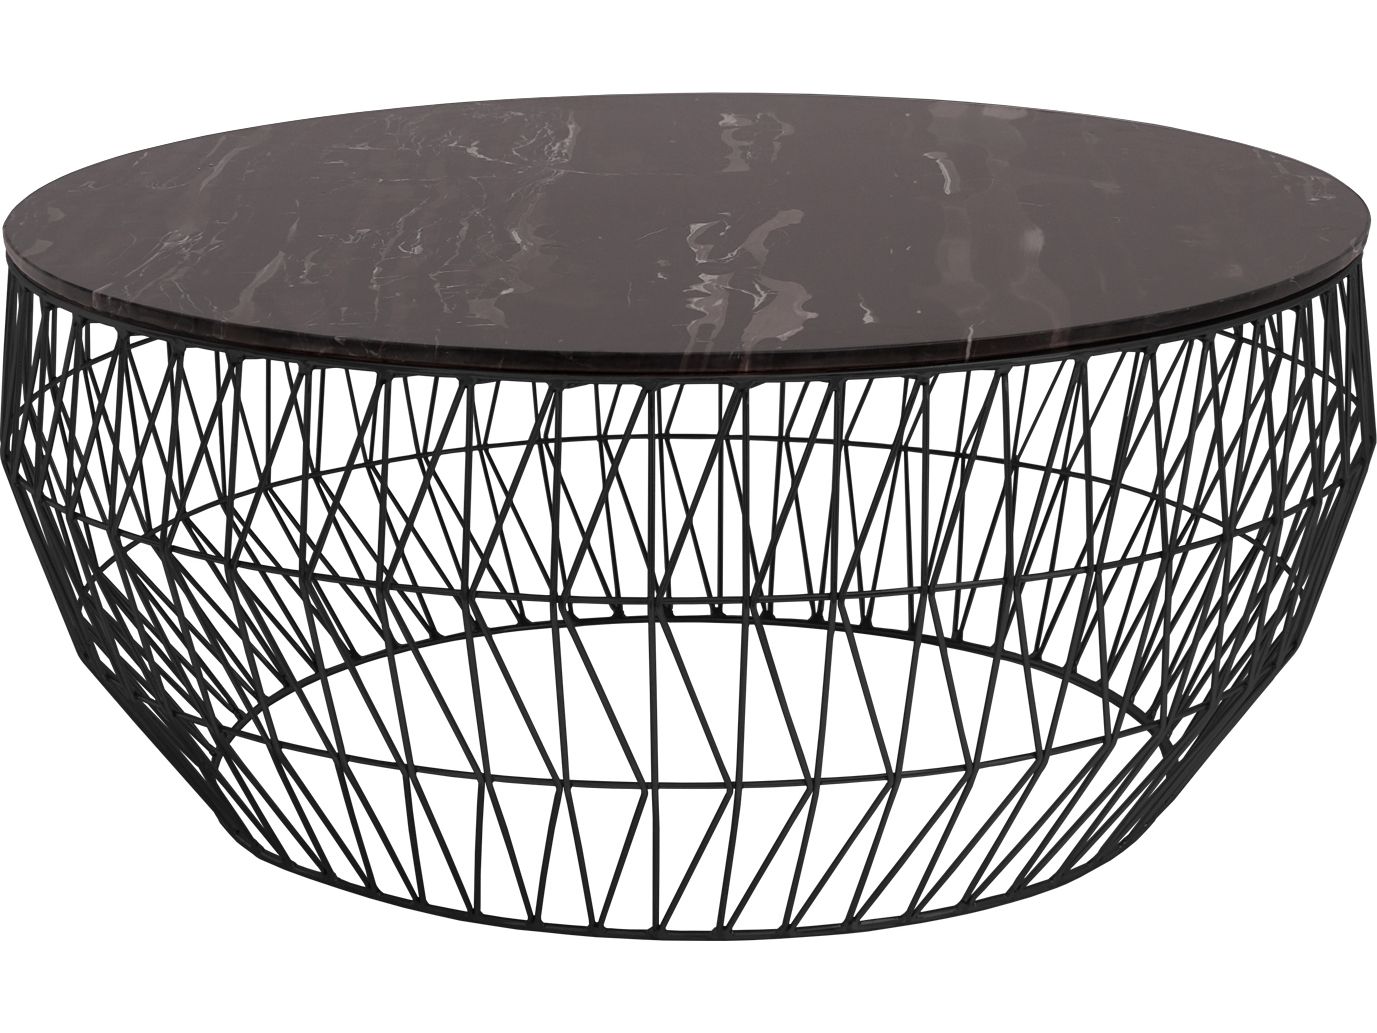 Black Outdoor Coffee Table Uk : Portside Outdoor Round Concrete Coffee Intended For Outdoor Half Round Coffee Tables (View 13 of 20)